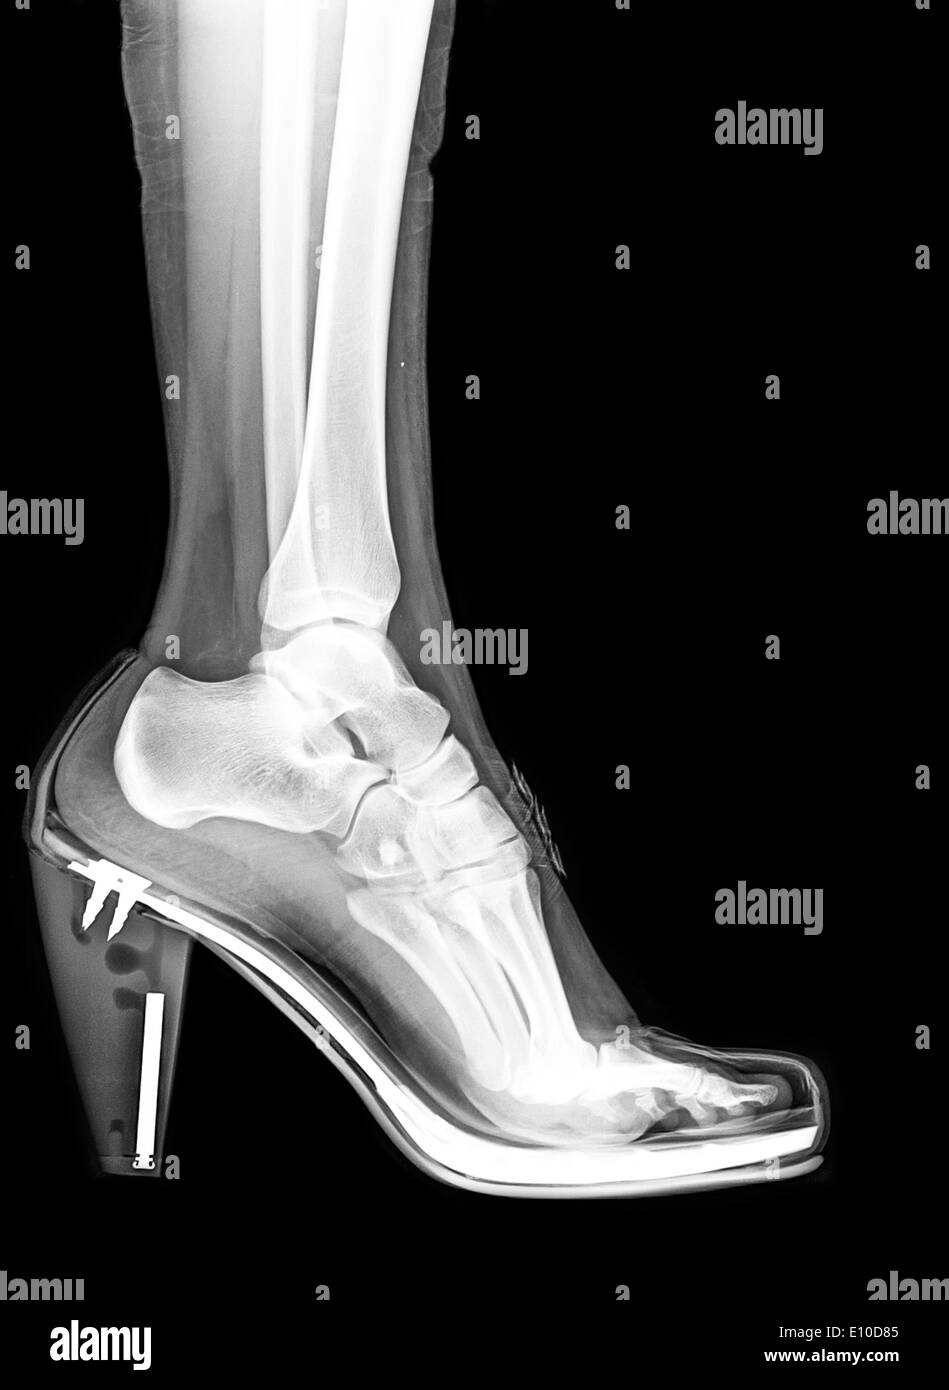 x-ray-of-a-foot-and-ankle-in-a-high-heel